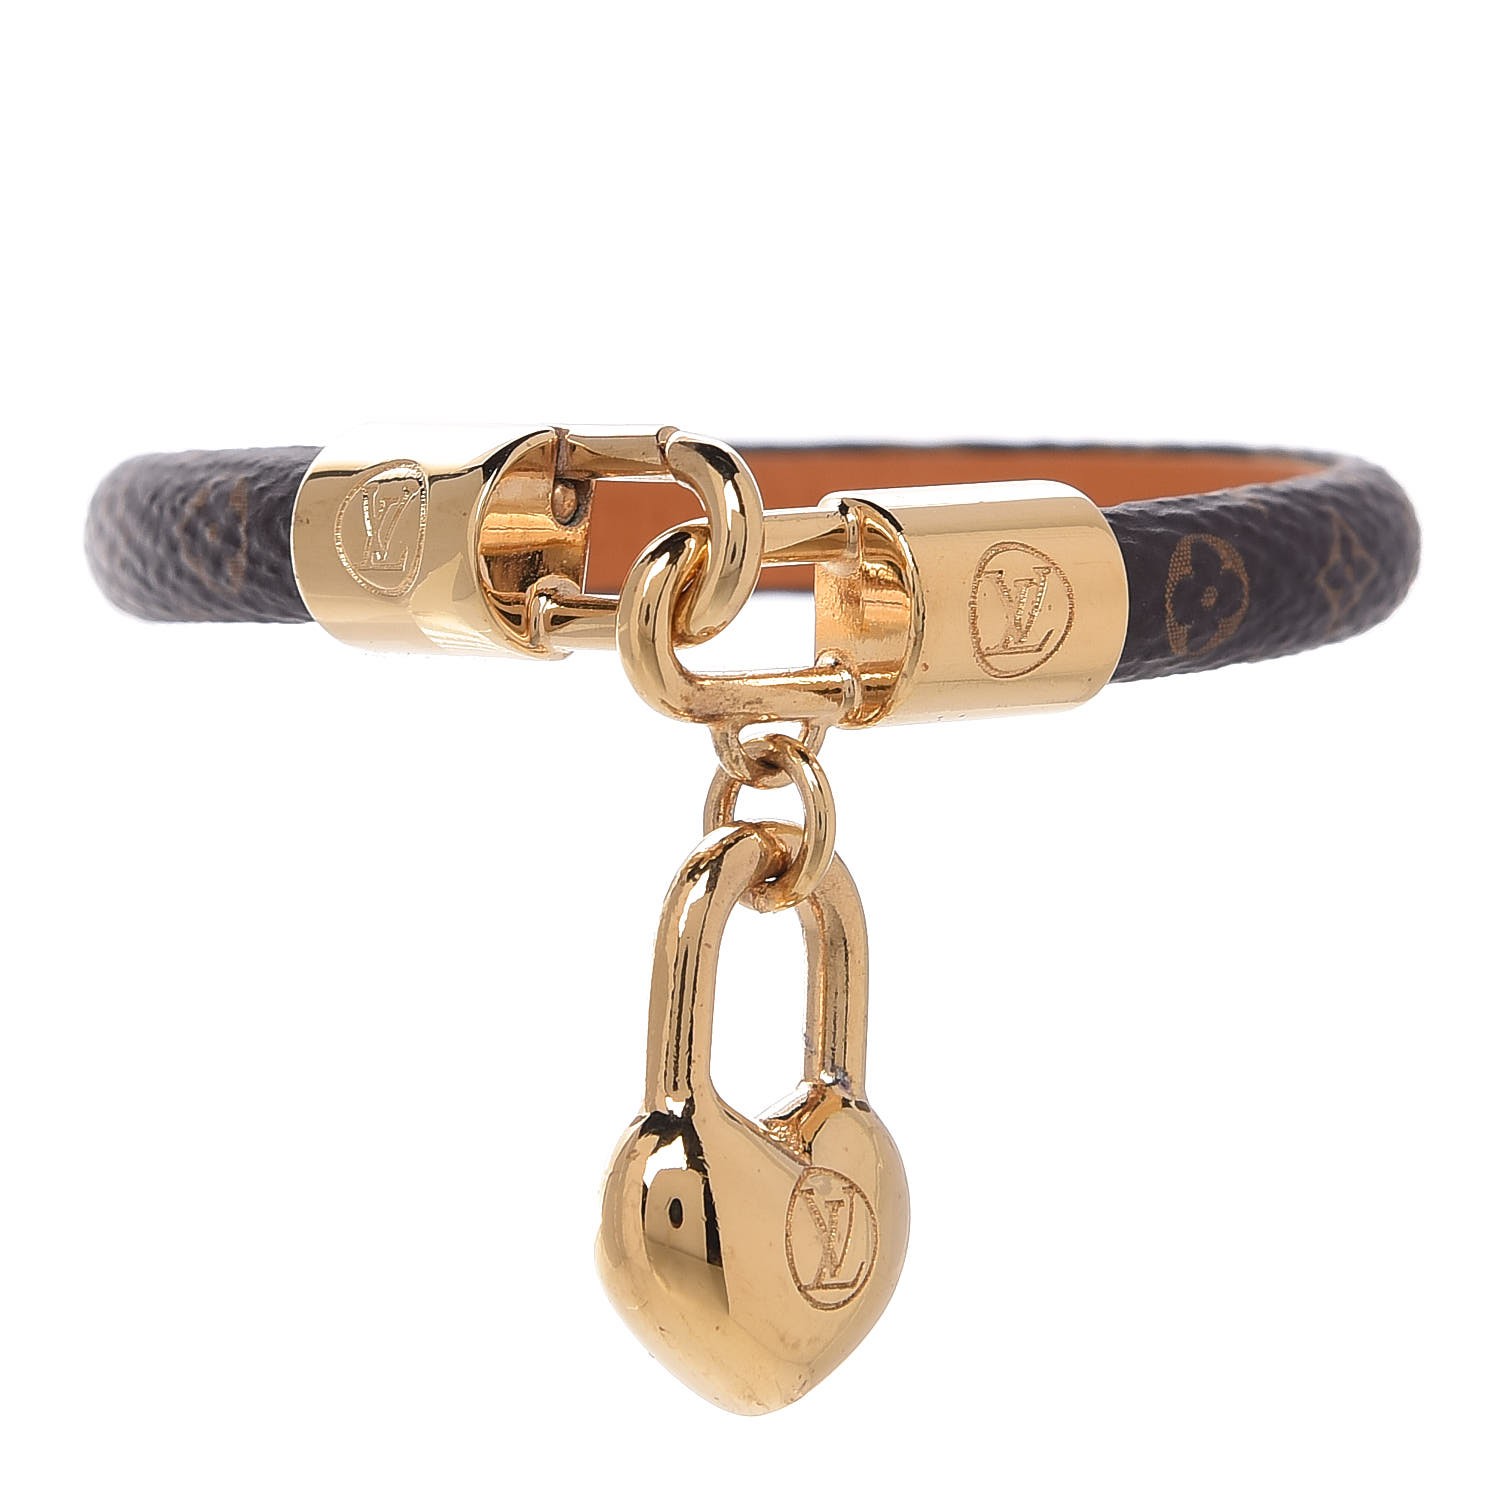 Leather bracelet Louis Vuitton Camel in Leather - 34276471